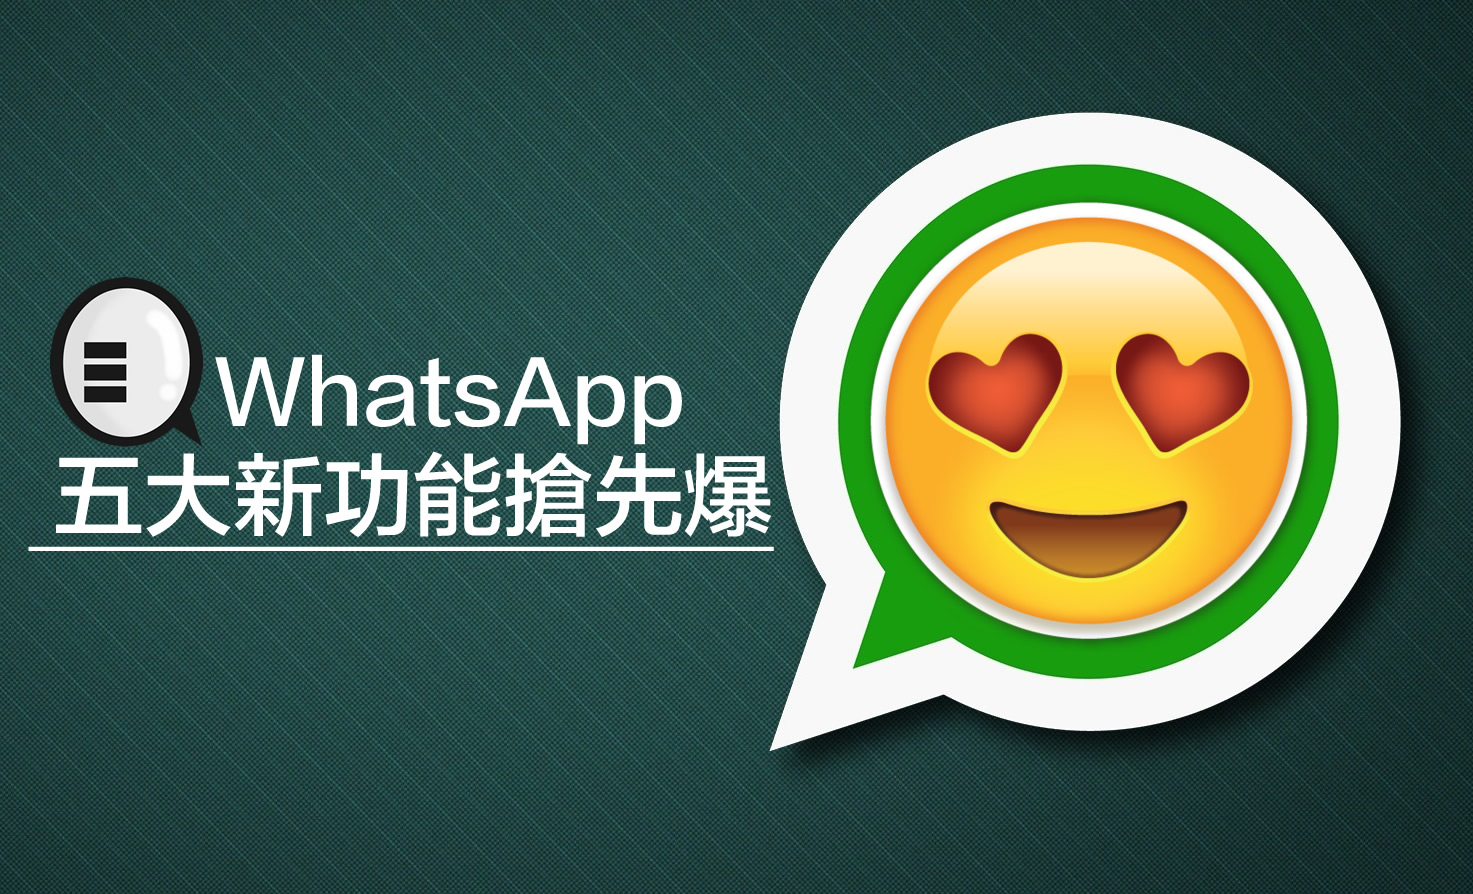 whatsapp-5features